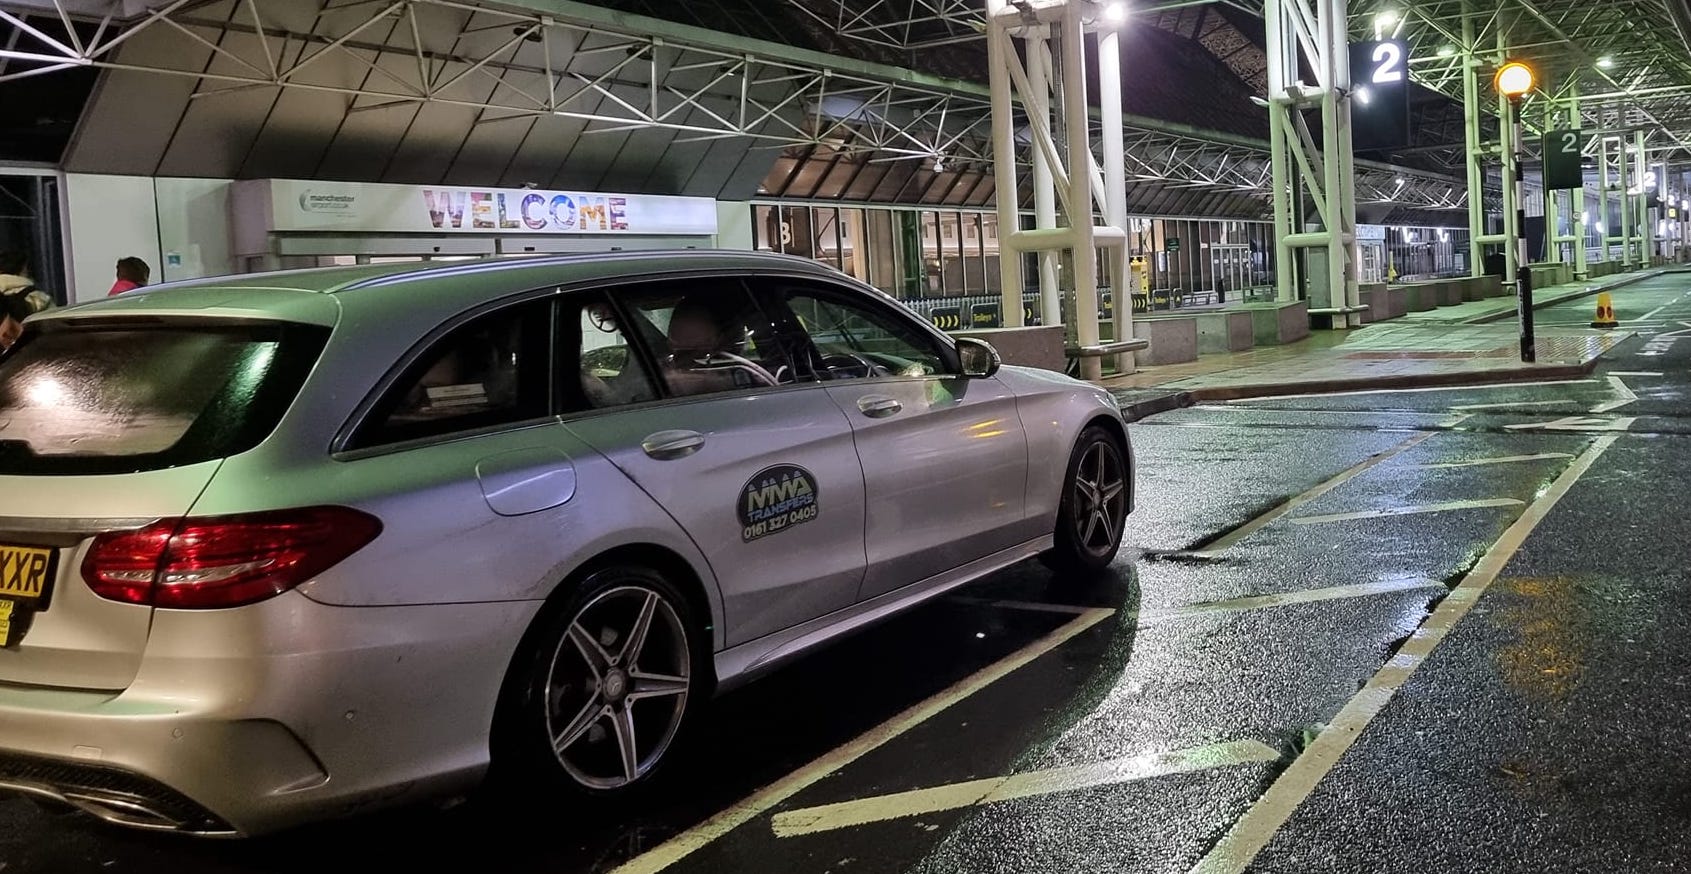 Take a Taxi from Manchester Airport to Blackburn with a free Meet and Greet Service